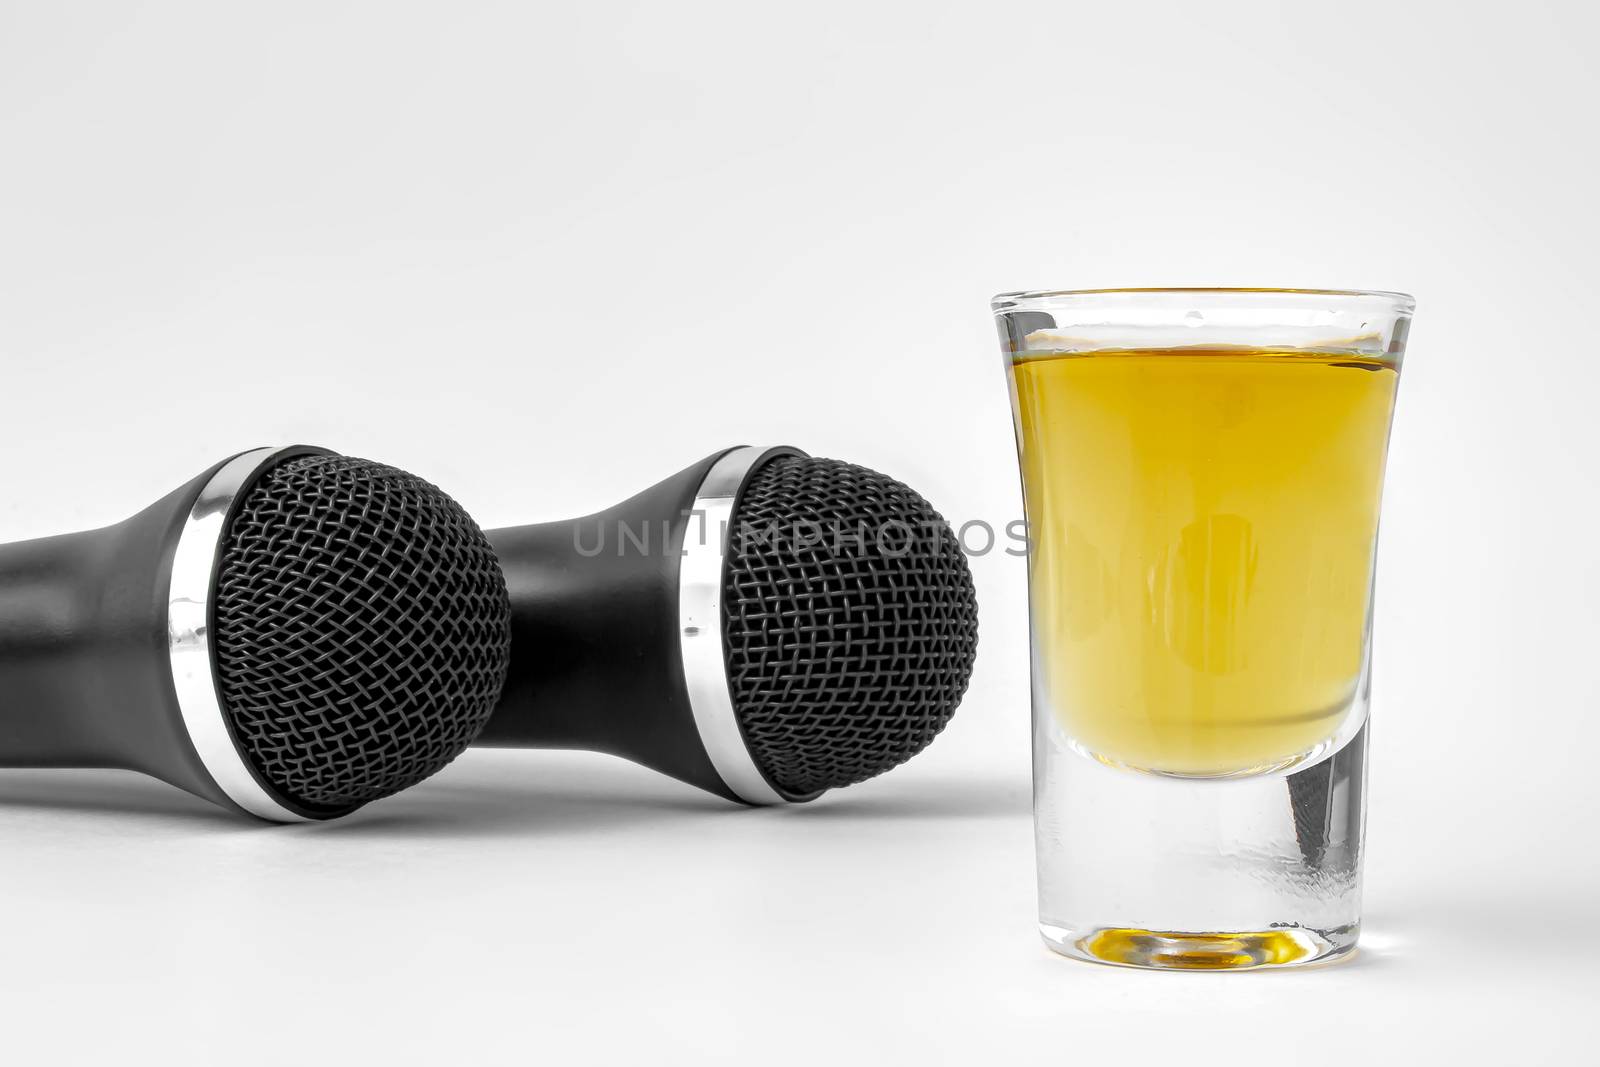 A shoot glass with liquor and two karaoke microphones on a white background